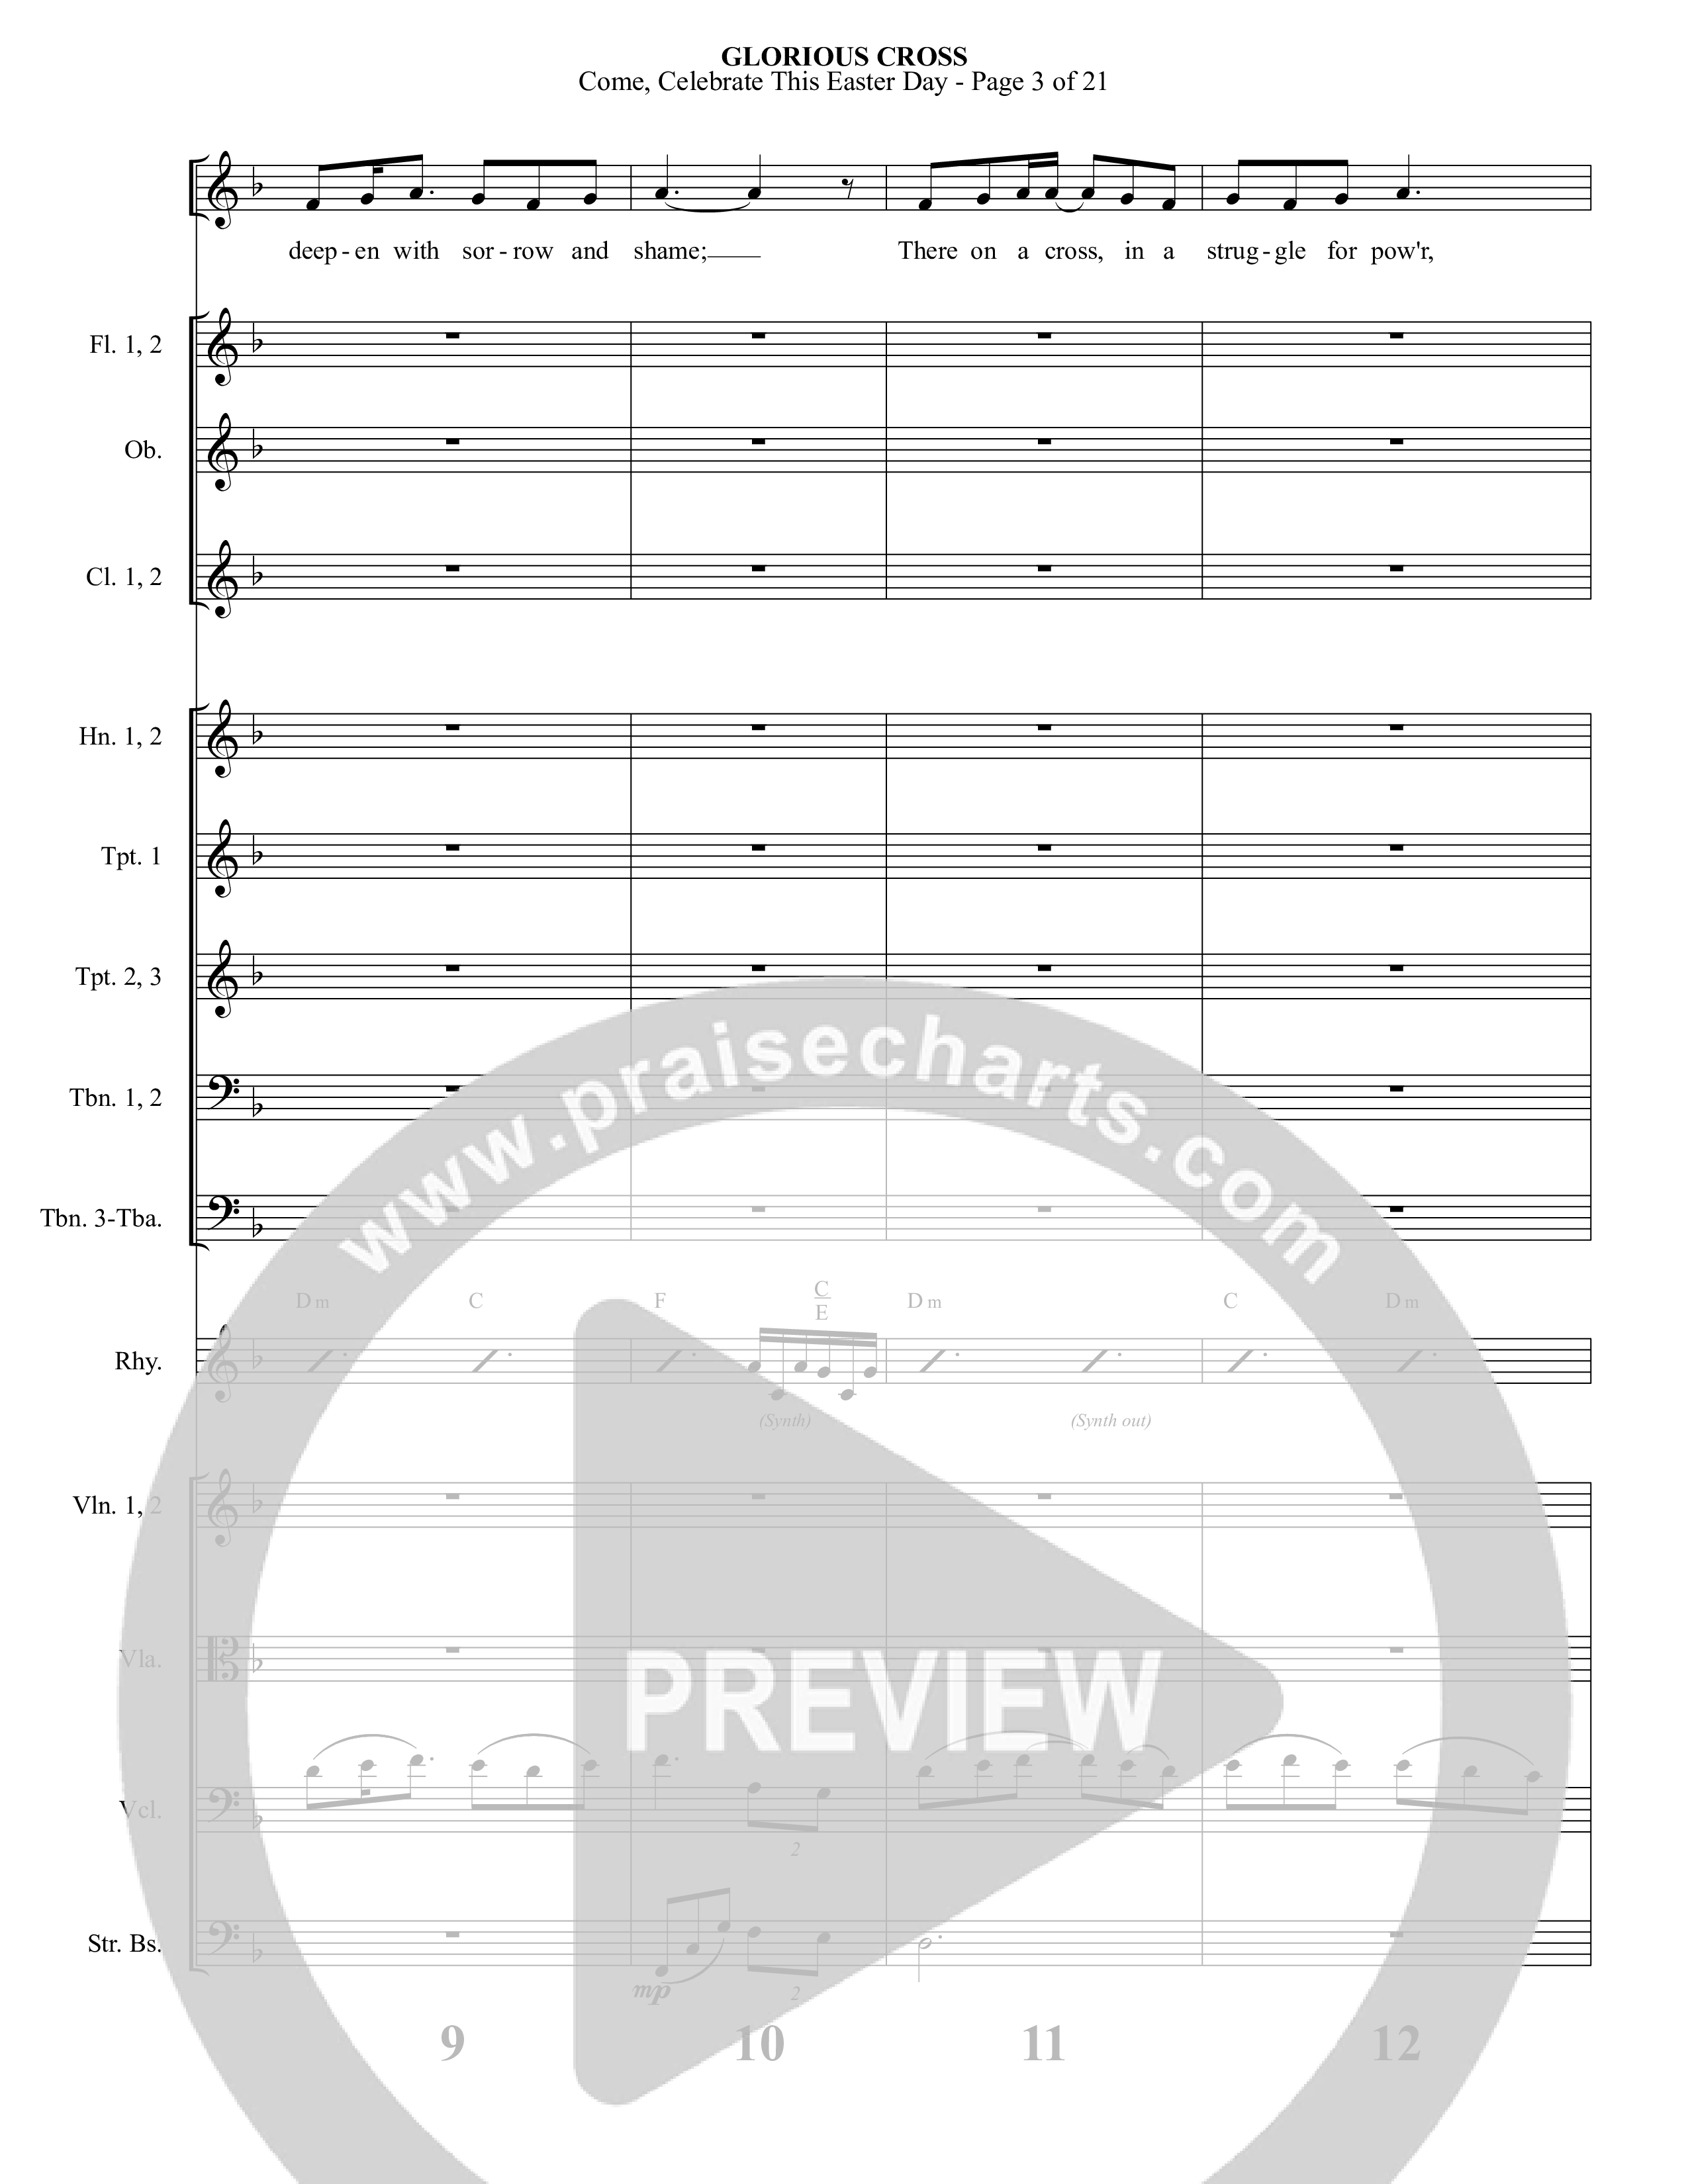 Glorious Cross (5 Song Choral Collection) Song 4 (Orchestration) (Foster Music Group / Arr. Marty Parks)